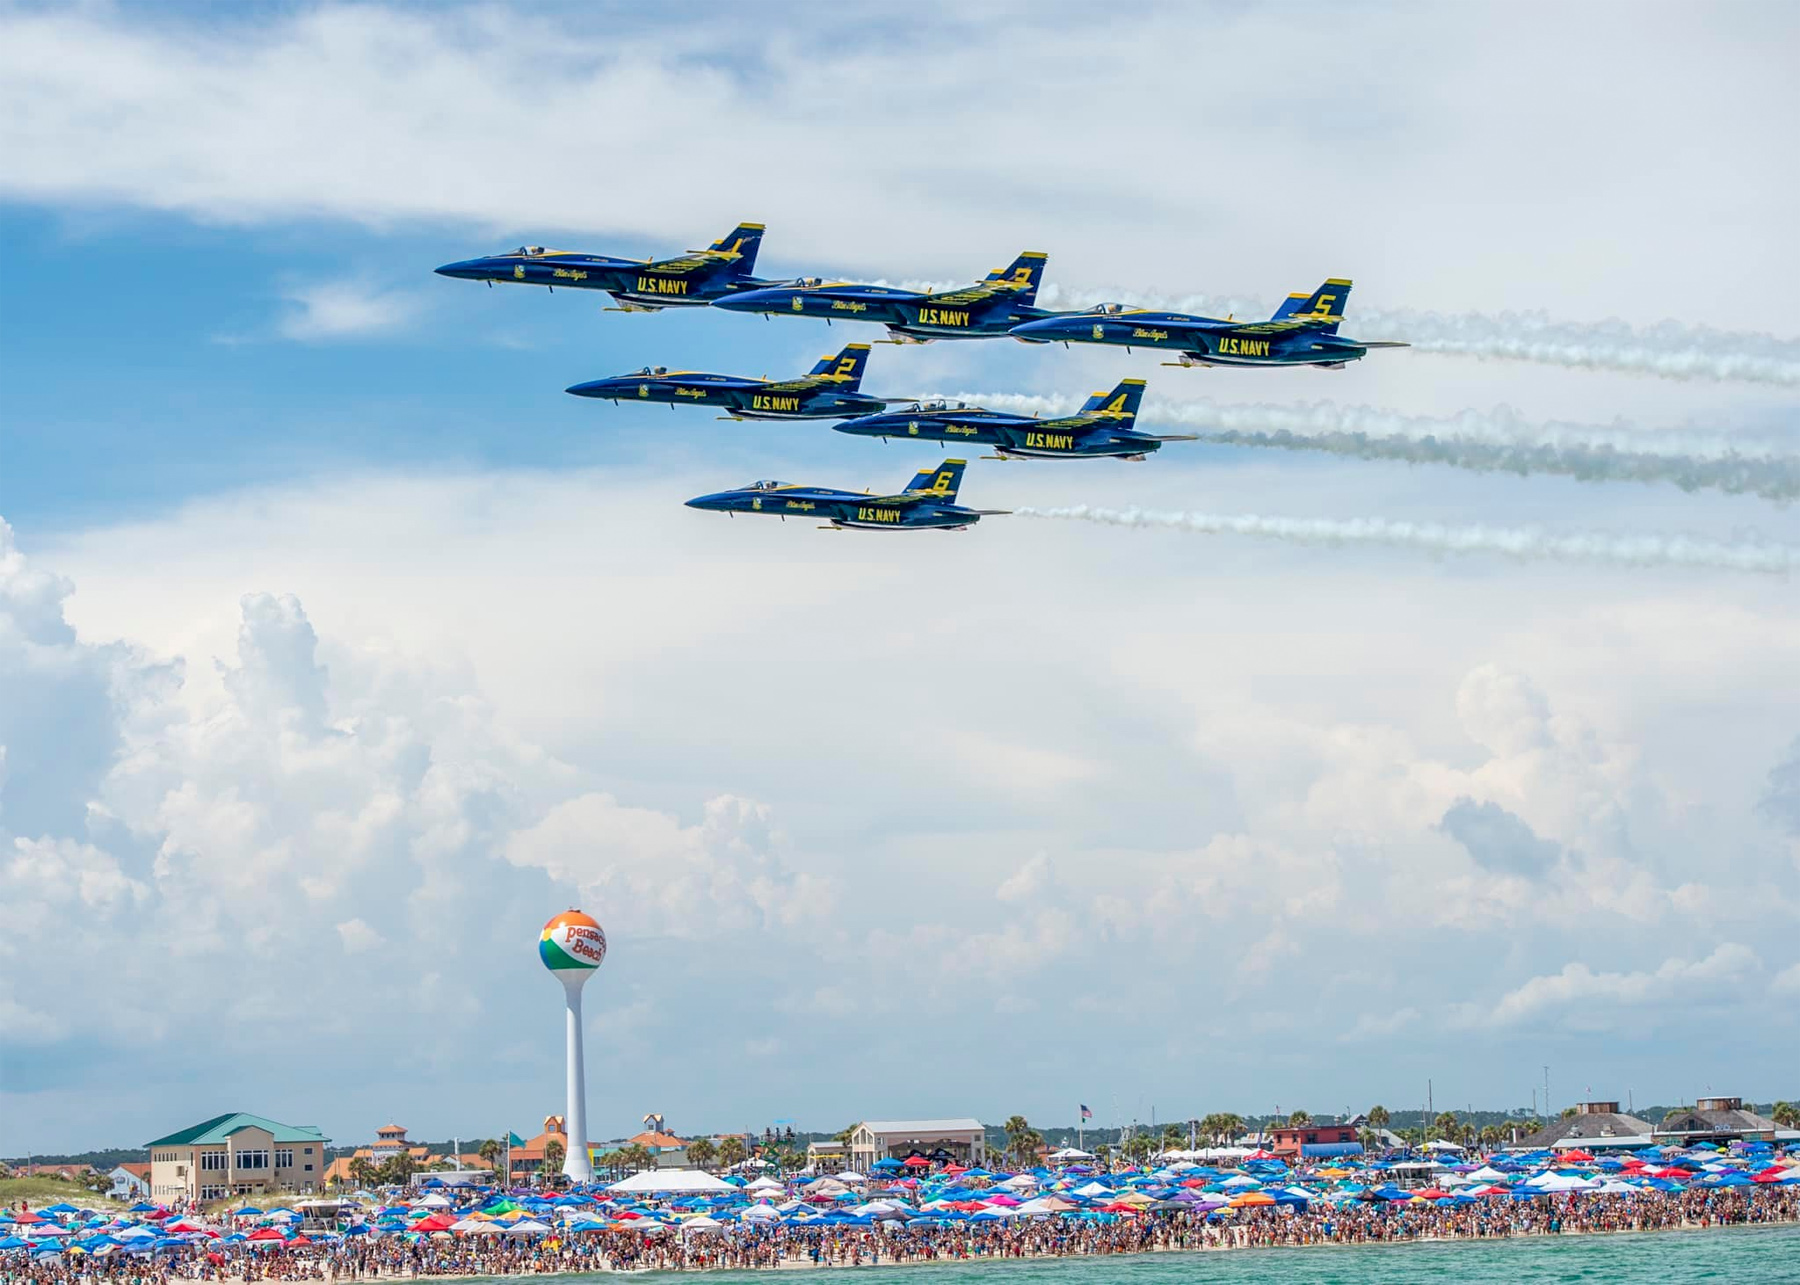 One More Look The Blue Angels Over Pensacola Beach (Photo Gallery